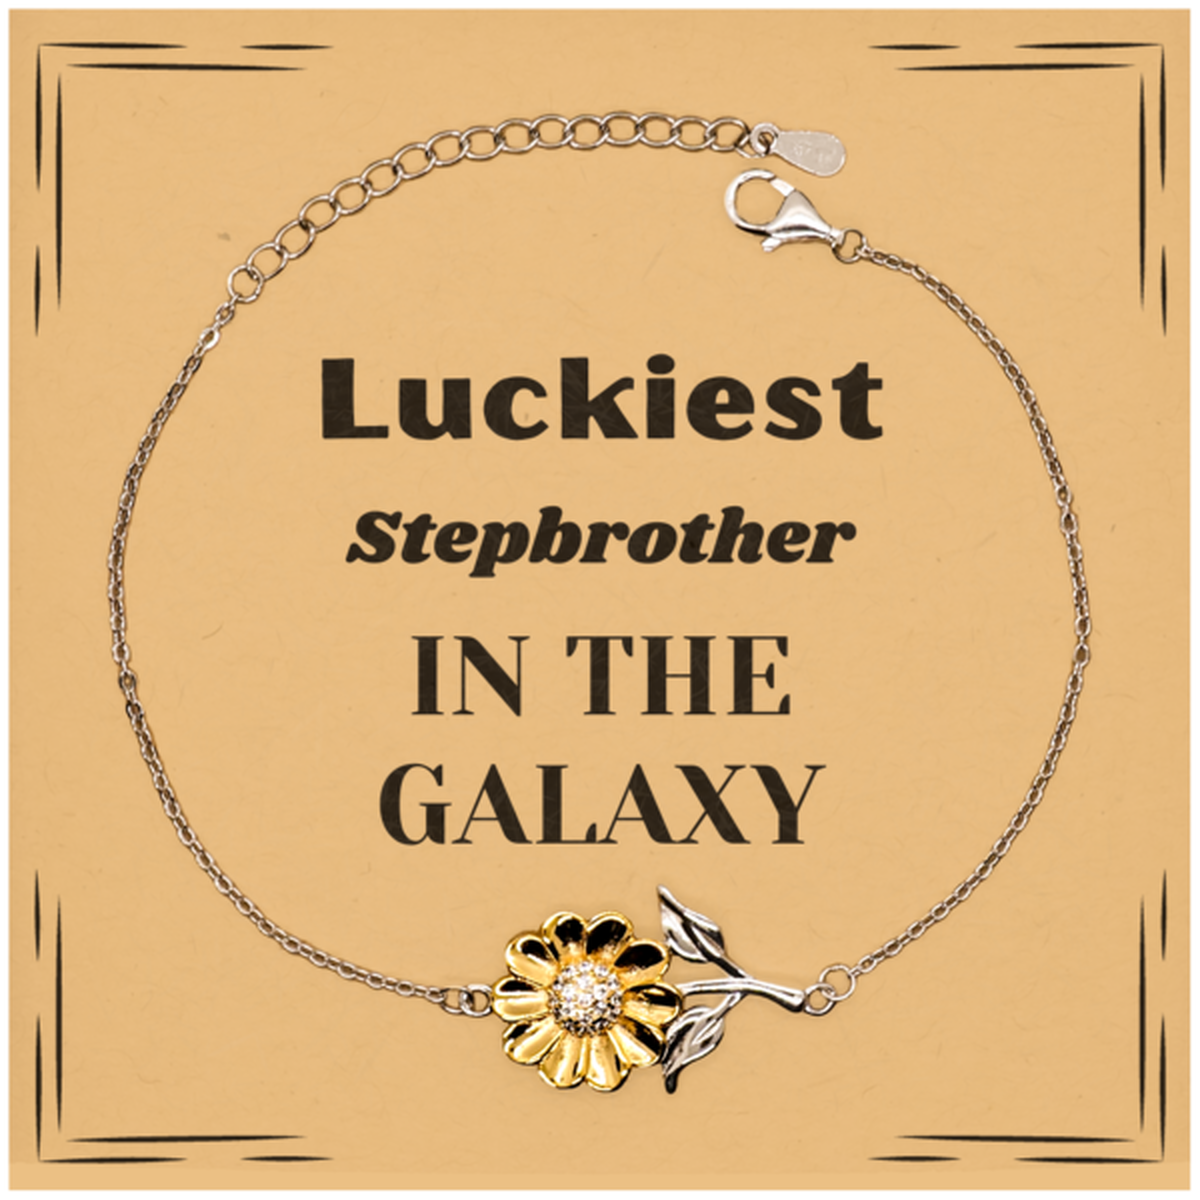 Luckiest Stepbrother in the Galaxy, To My Stepbrother Message Card Gifts, Christmas Stepbrother Sunflower Bracelet Gifts, X-mas Birthday Unique Gifts For Stepbrother Men Women